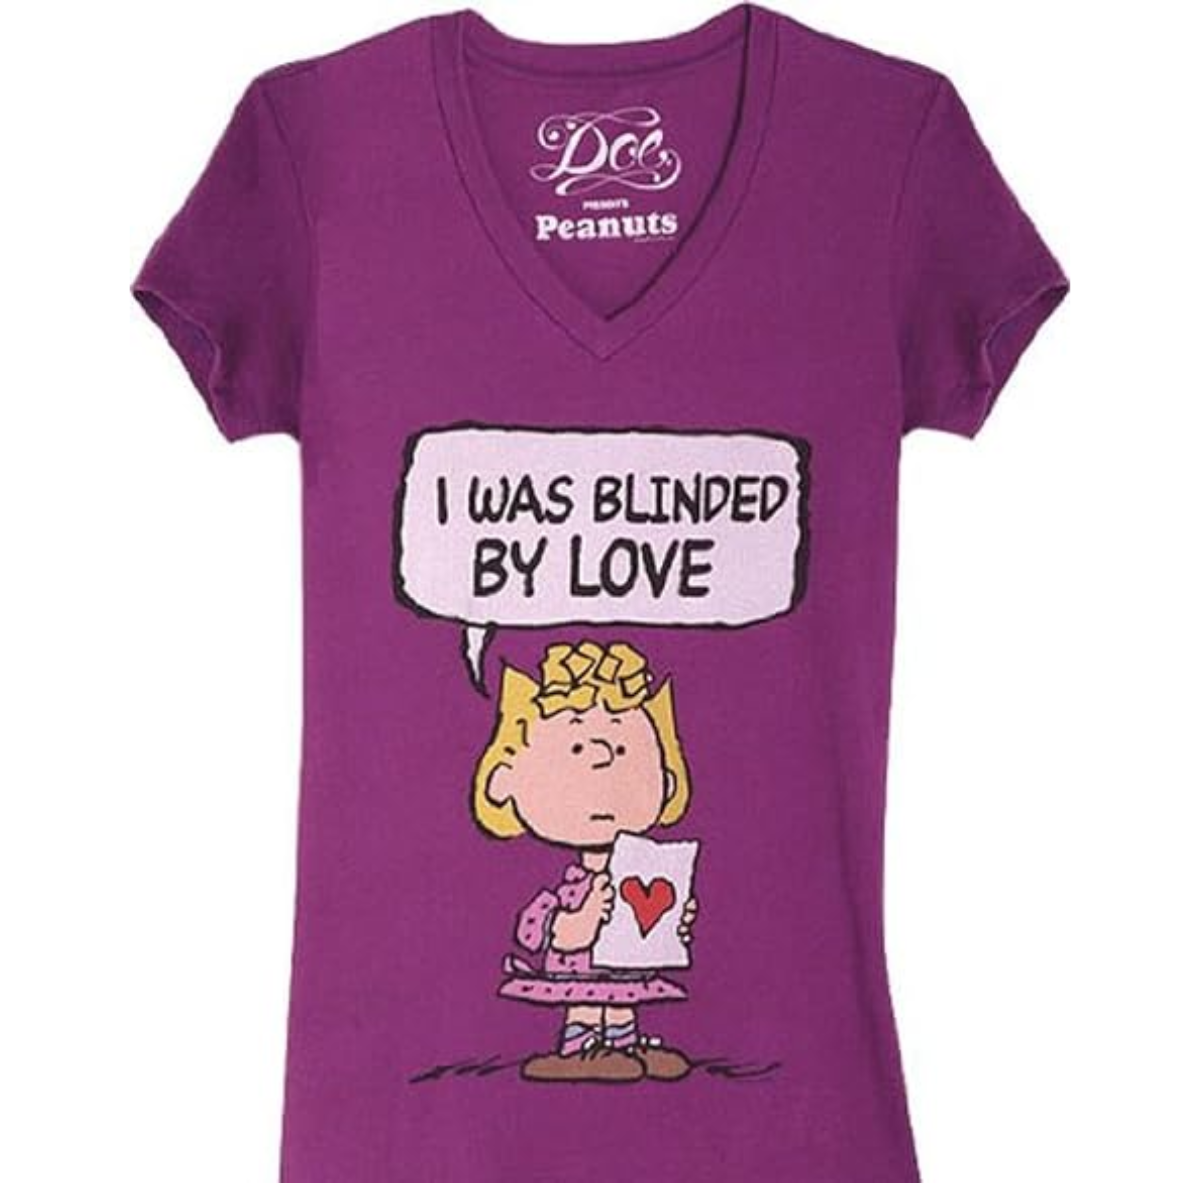 Peanuts Sally Brown Blinded by Love Purple Juniors T-Shirt